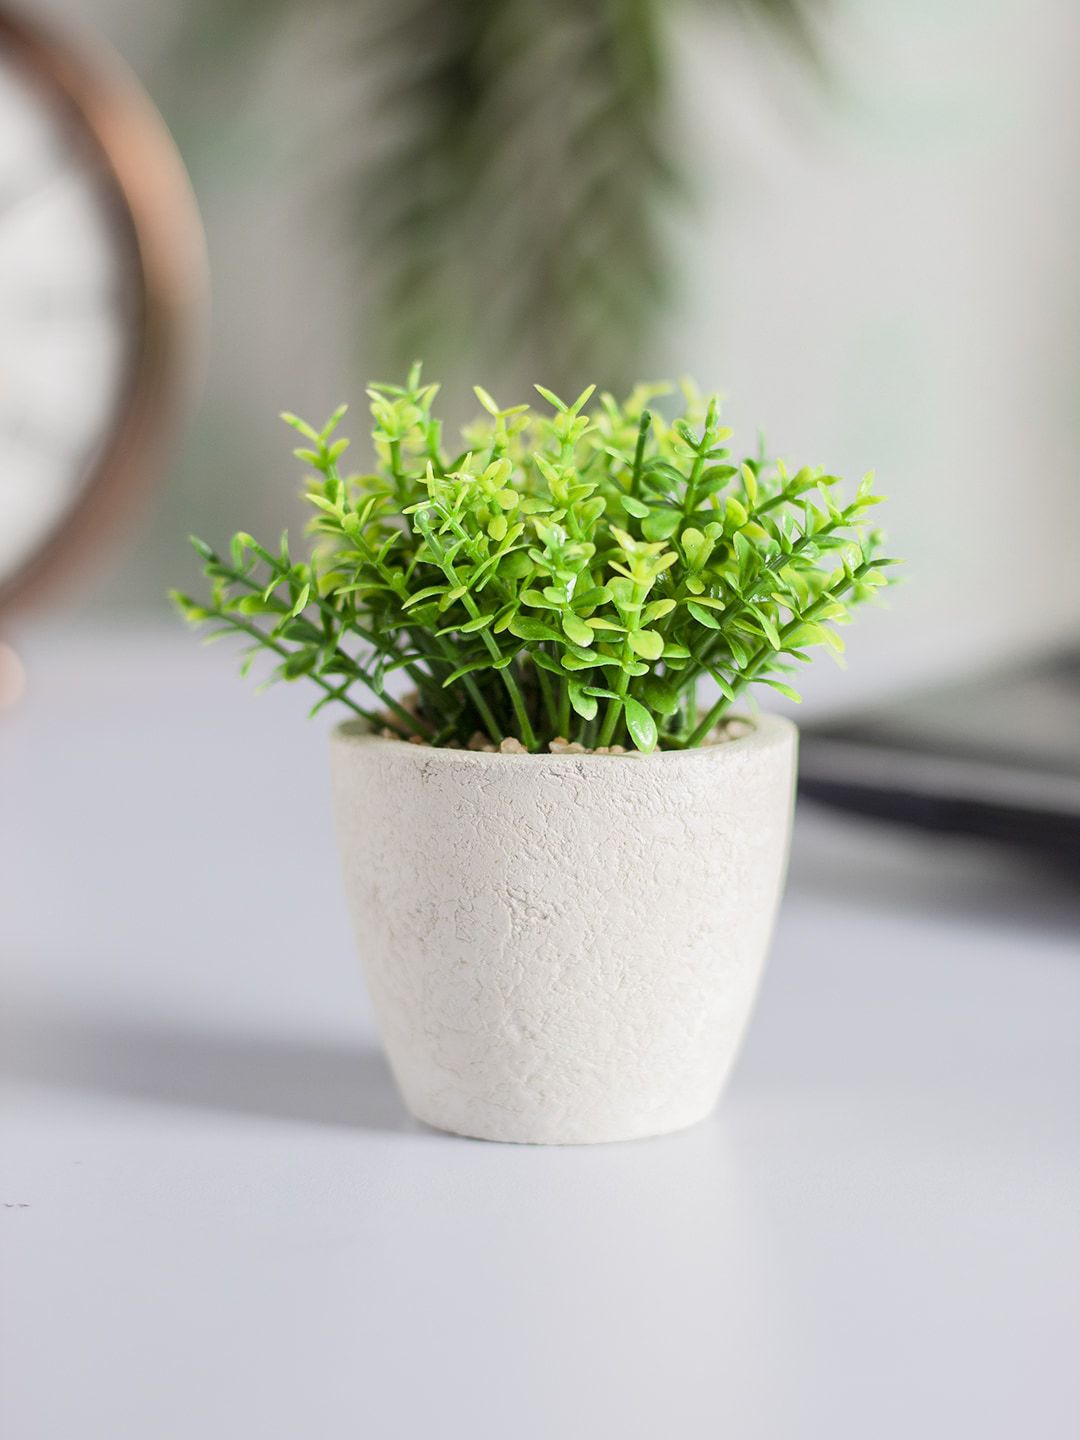 MARKET99 White & Green Artificial Plants With Pot Price in India